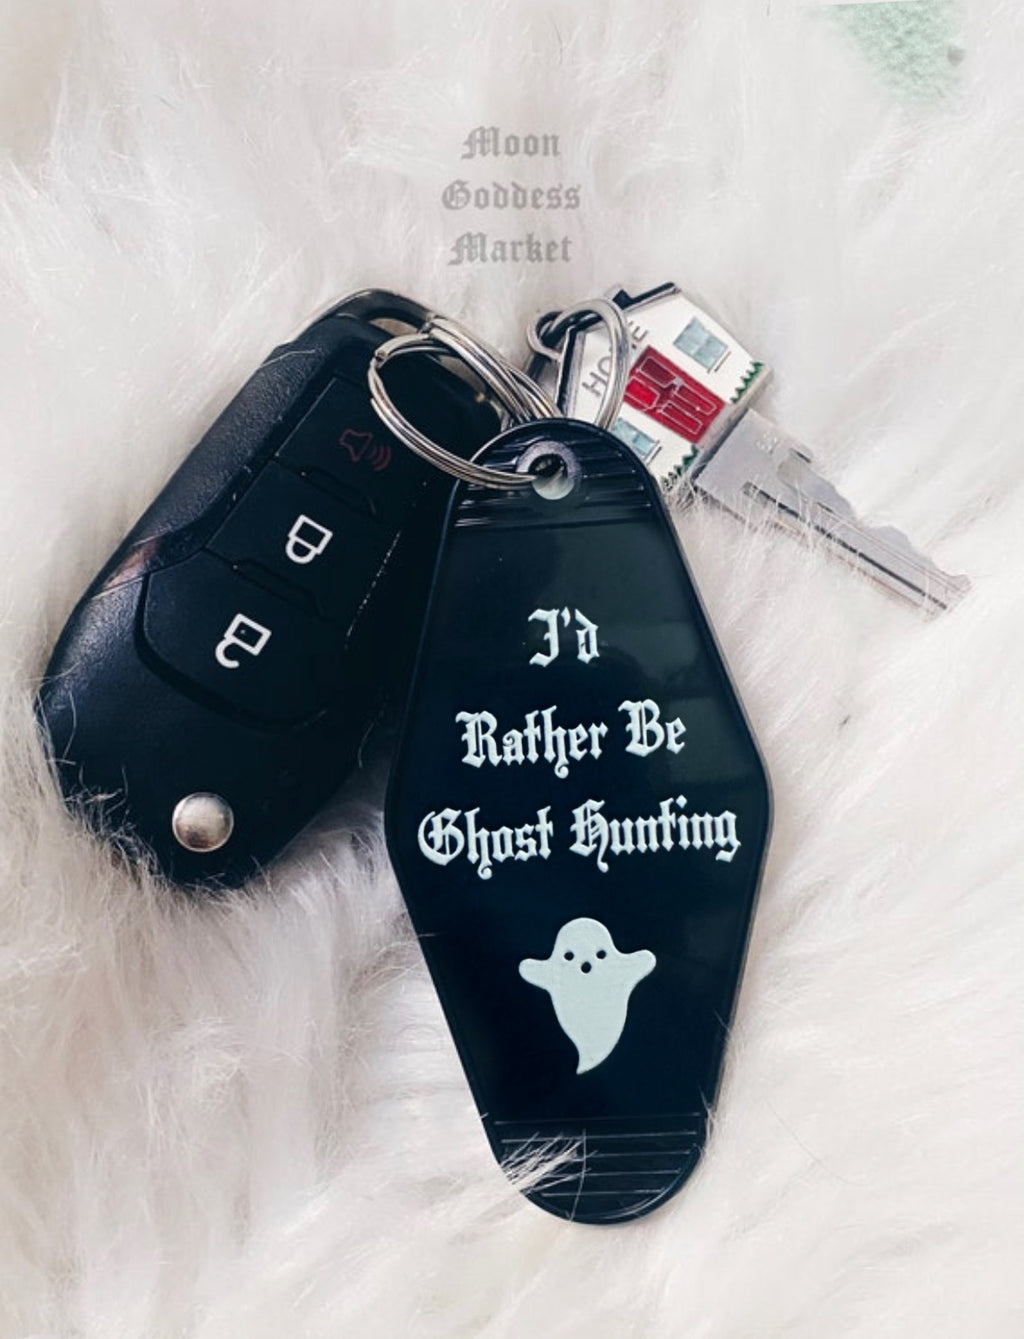 I’d Rather Be Ghost Hunting Hotel Motel Keychain